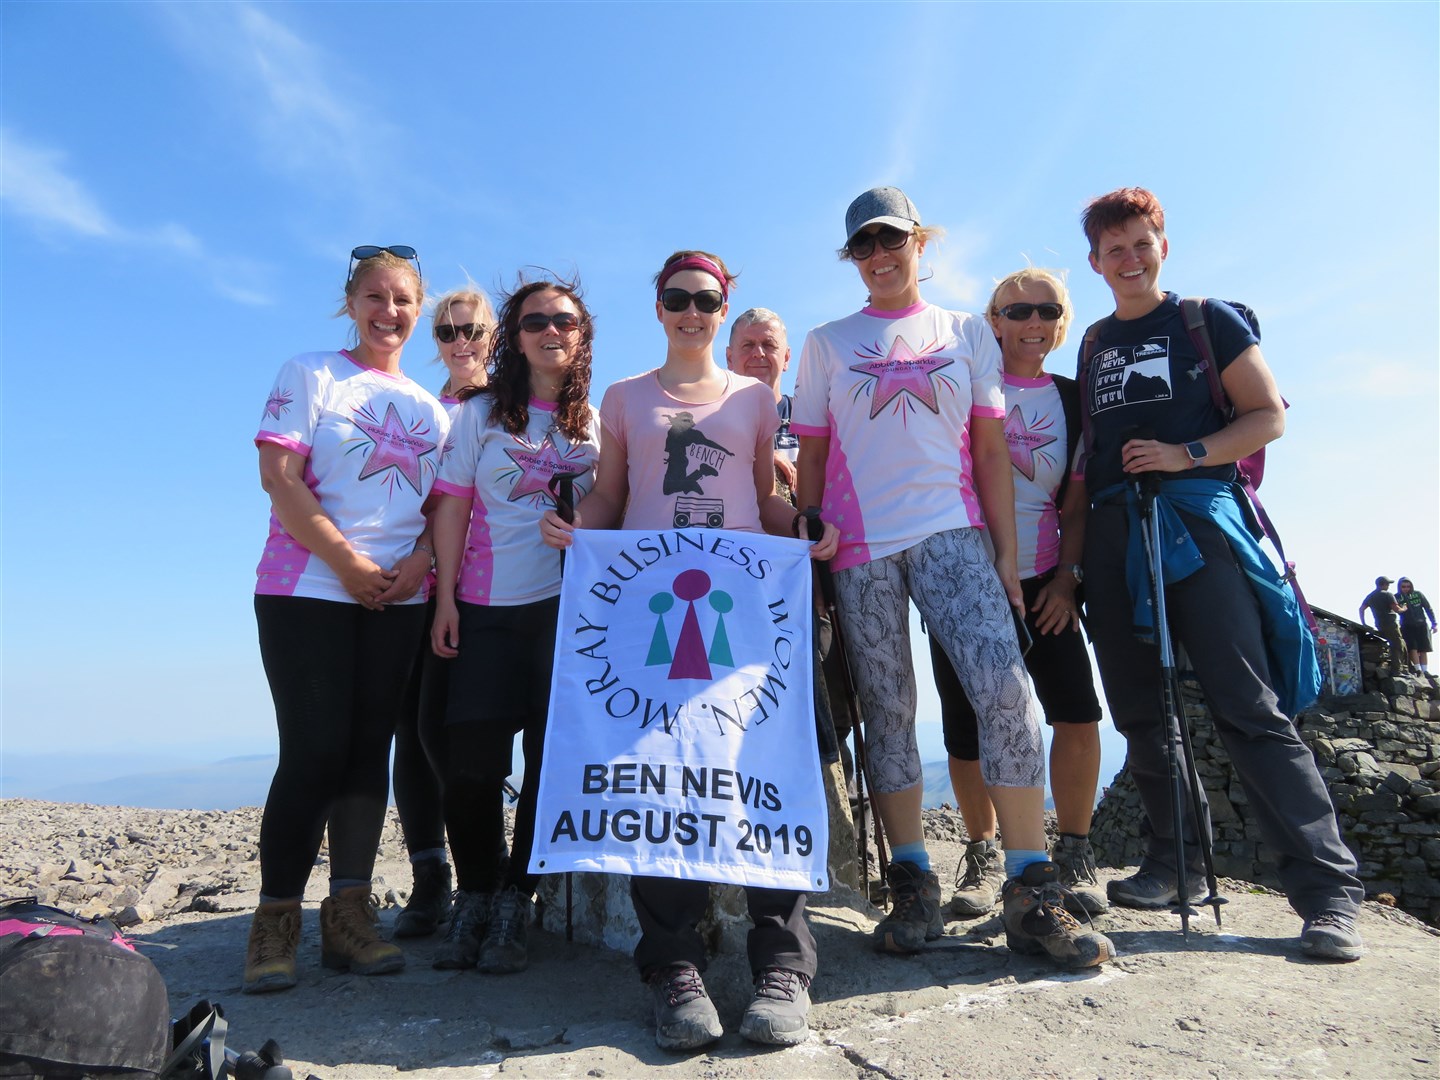 At the summit of Ben Nevis are (from left) Bev Alexander, Caroline Byrne, Claire Ironside, Amy Dee, Ailsa Stinson, Lisa Esslemont and Clare Locke joined by Clare’s husband Steve.